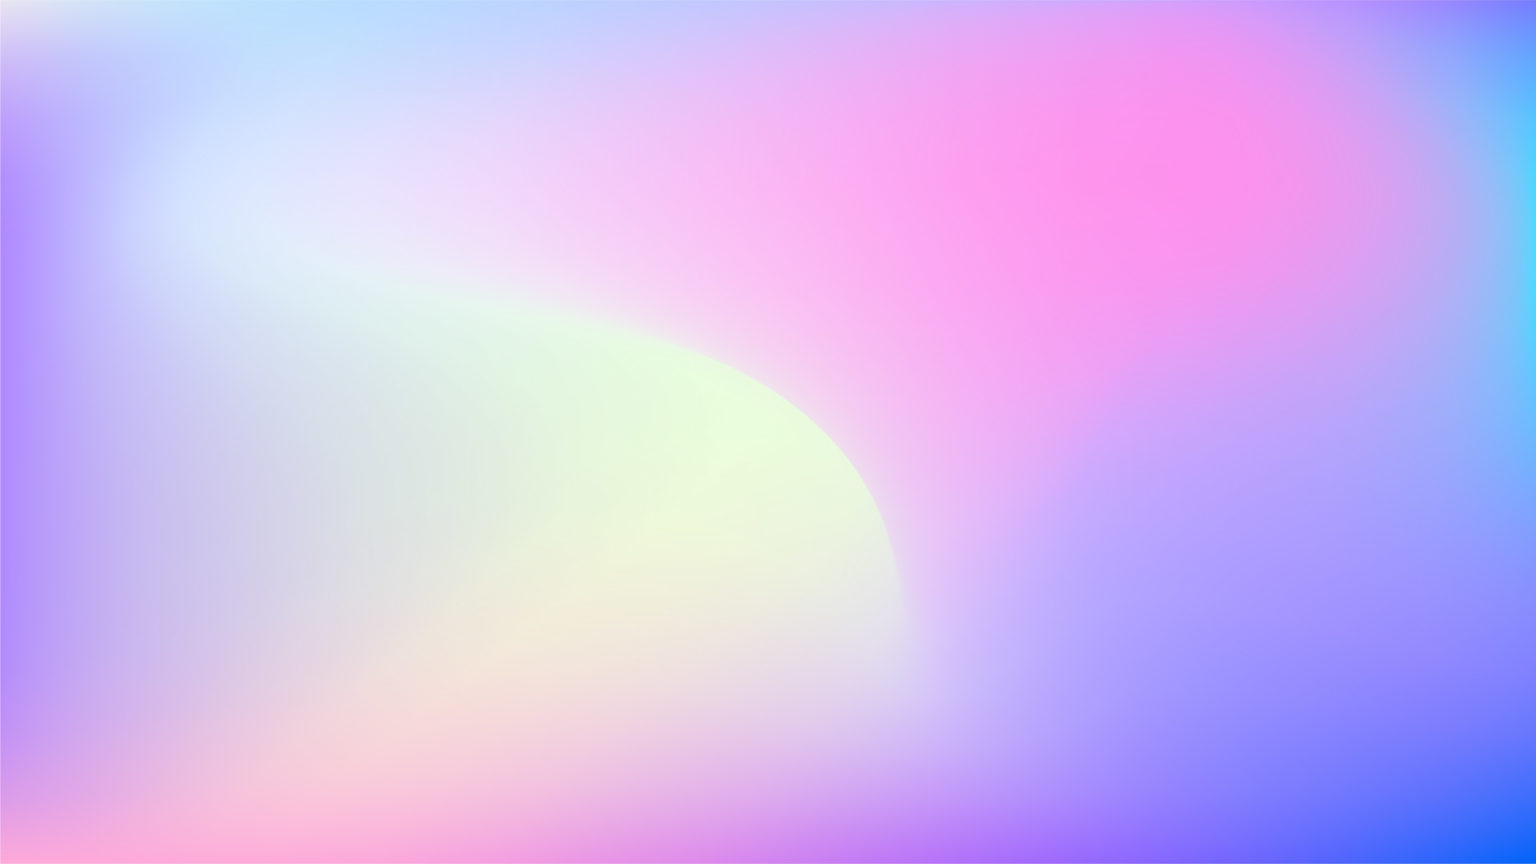 Multicolored Vector Gradients Pack